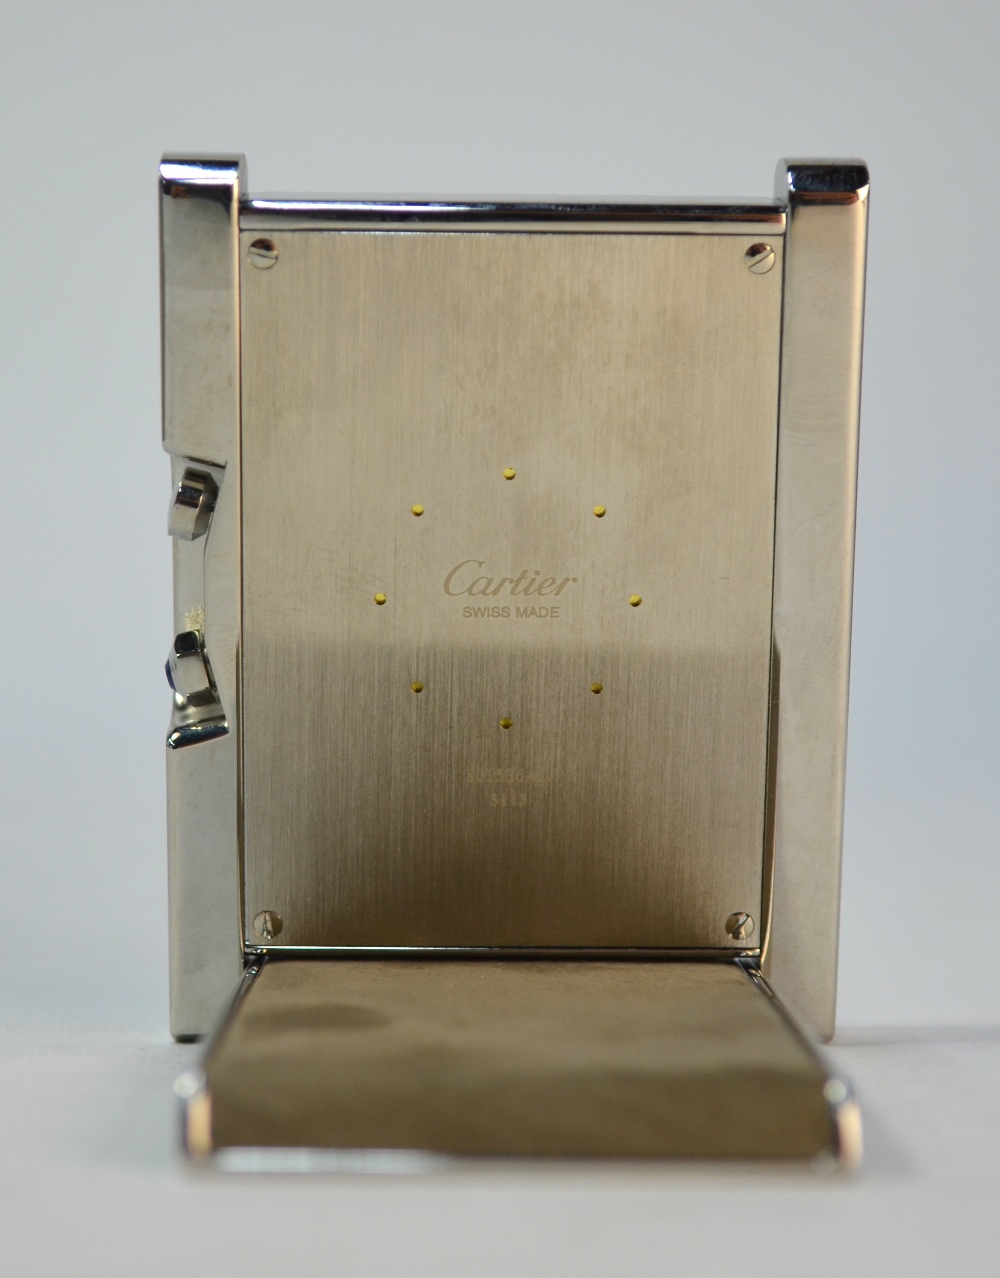 A Cartier stainless steel 'Desk Tank' Travel Clock with quartz movement, in original case with - Image 5 of 7